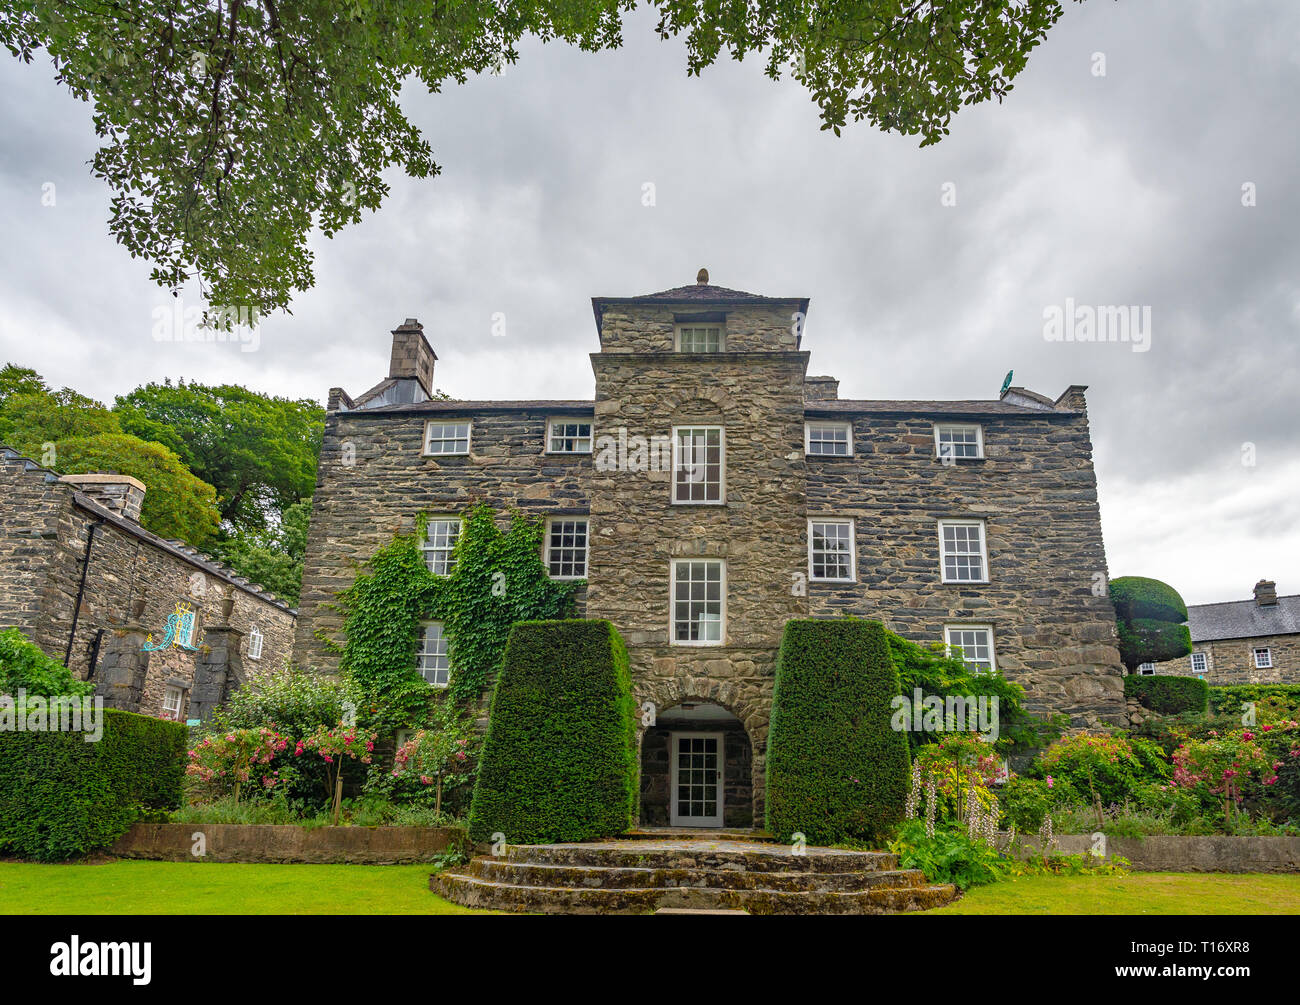 Central perspective view on the main part of the house of Plas Brondanw, Gwynedd, North Wales, United Kingdom Stock Photo